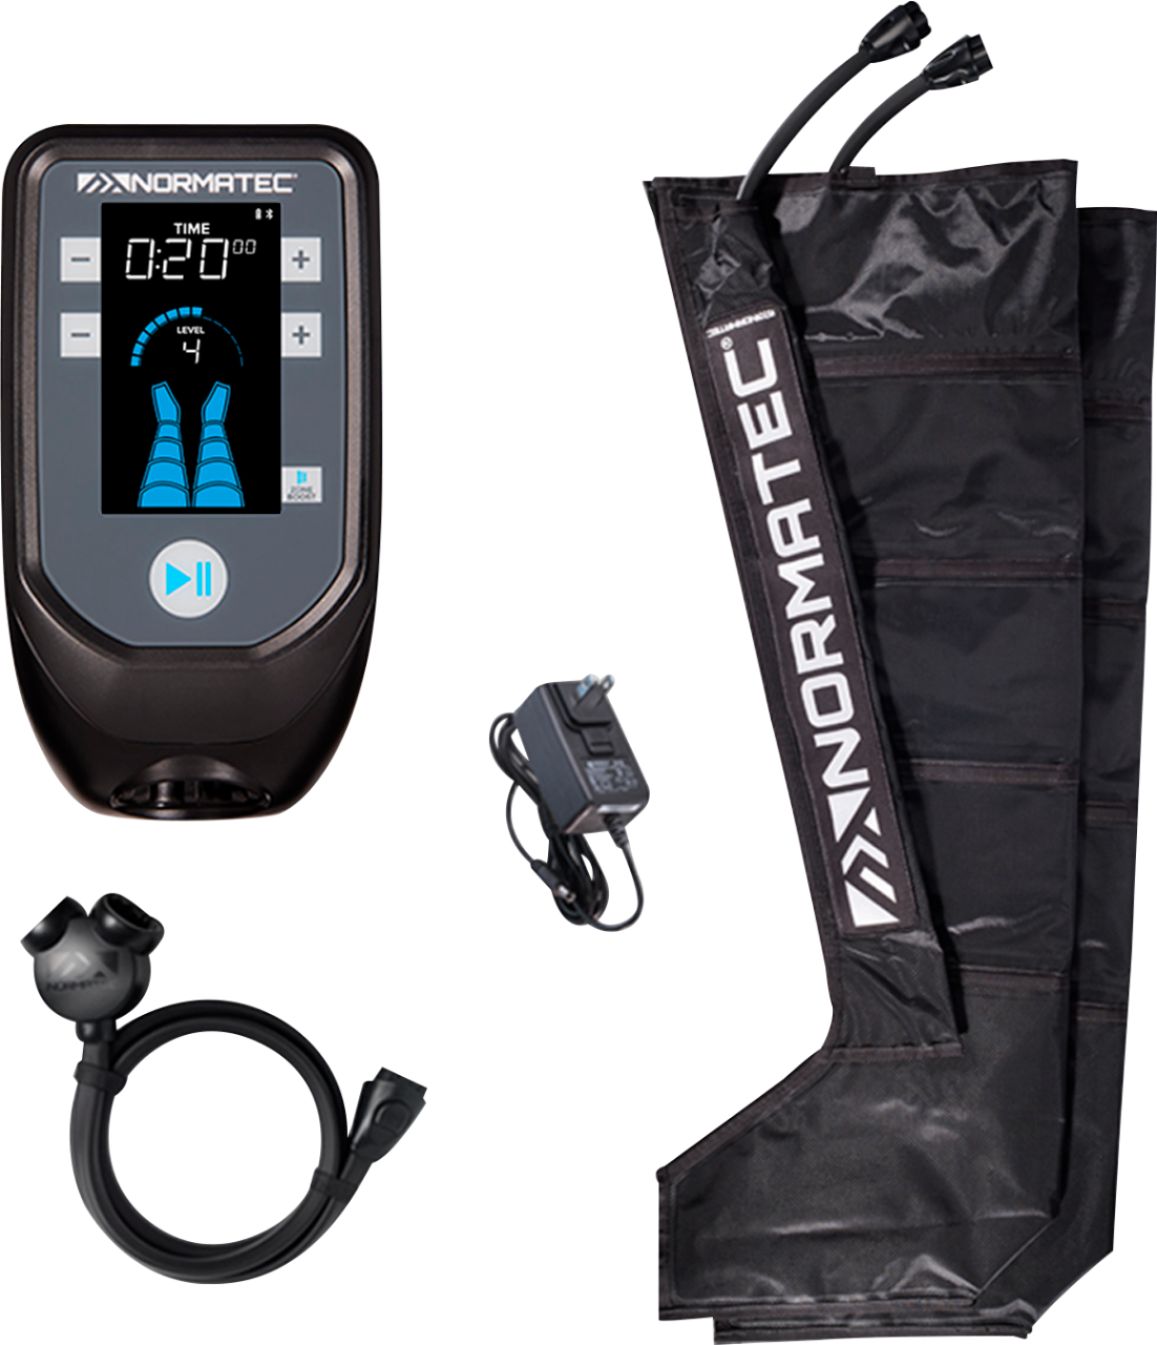 Enhancing Performance and Recovery: Introducing Wavetec's Full Leg